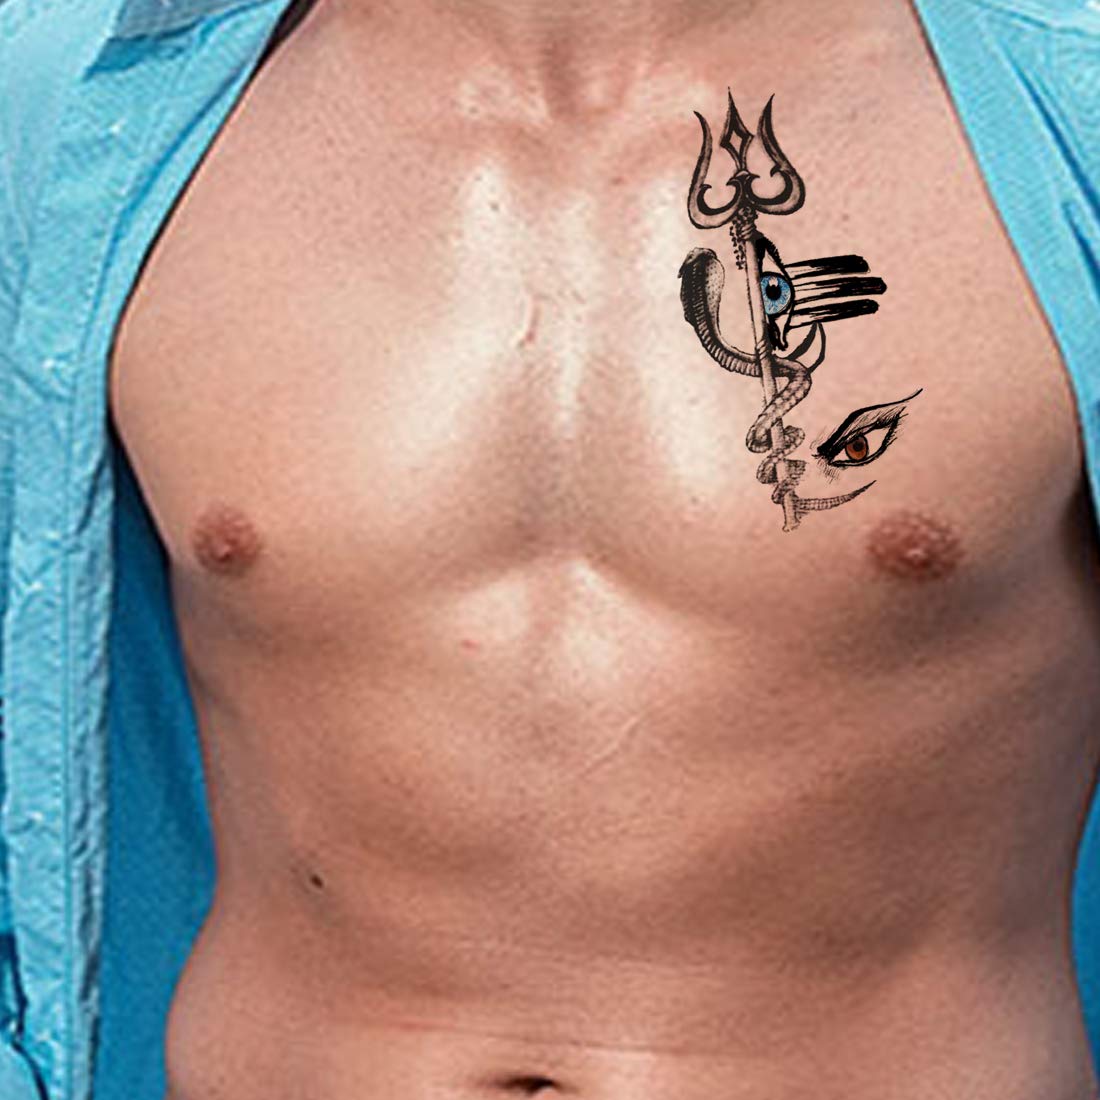 Download A Man With Tattoos On His Chest And Arms | Wallpapers.com